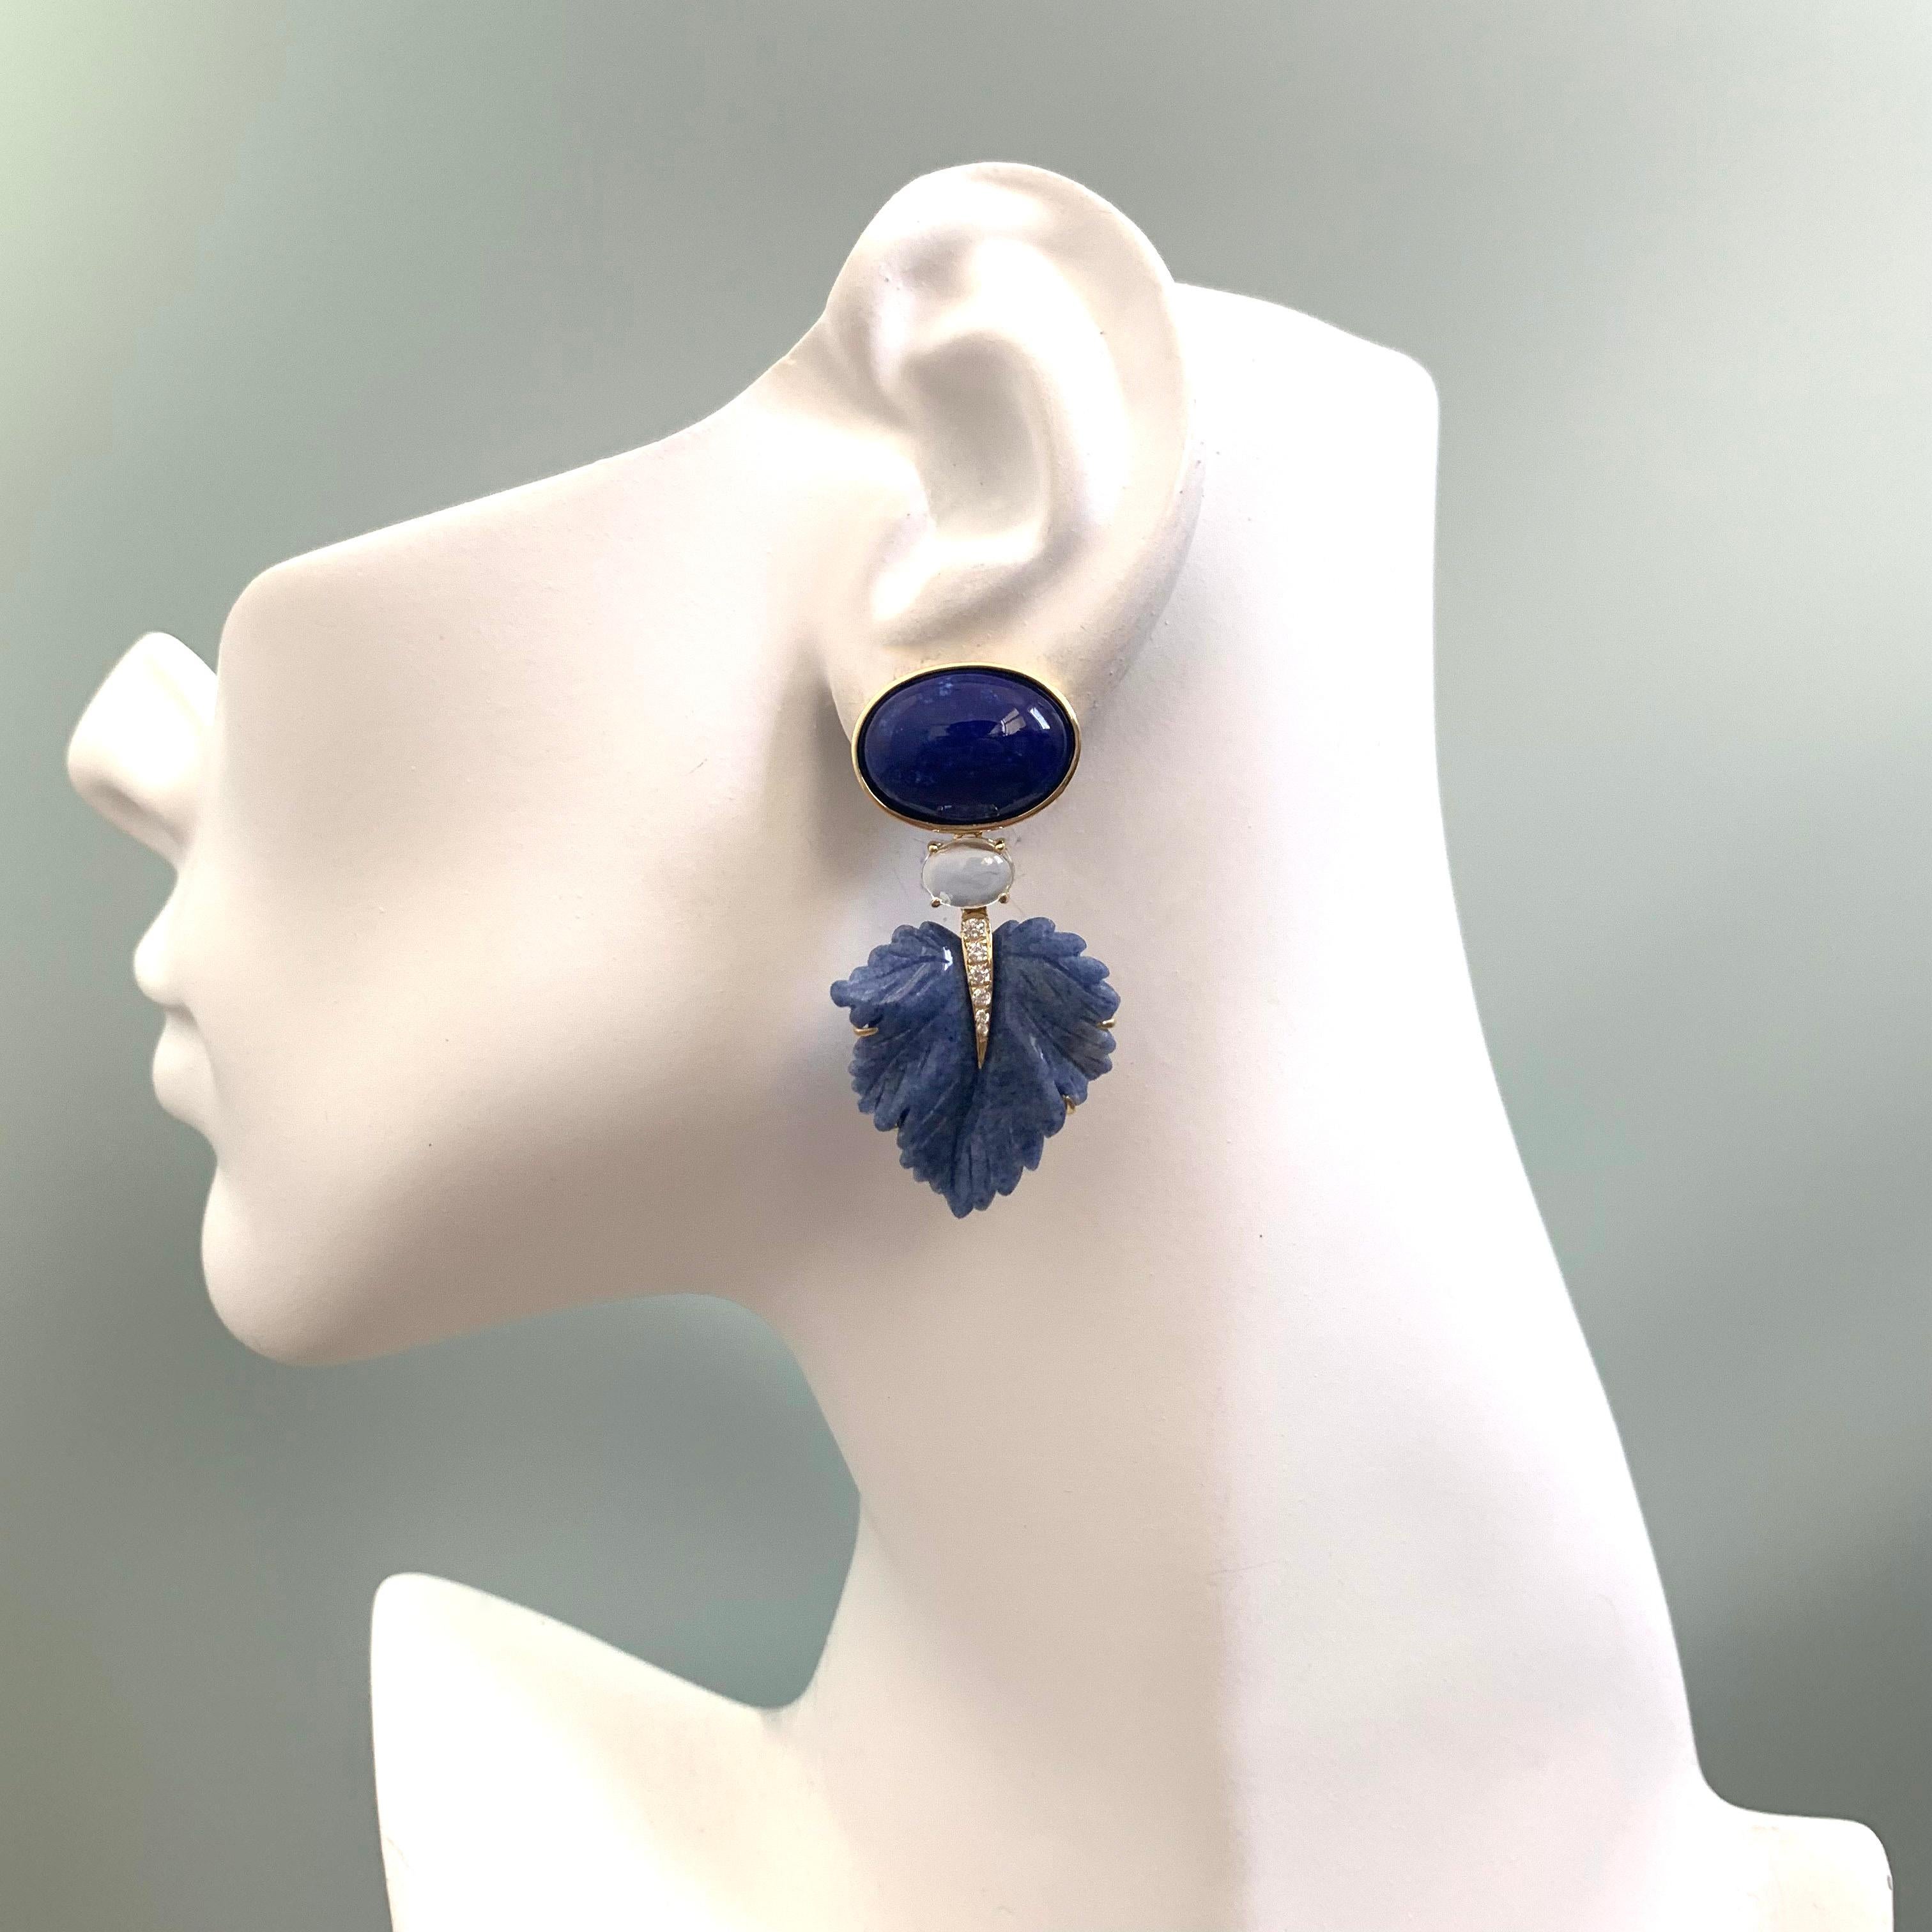 Mixed Cut Stunning Cabochon Lapis, Carved Blue Dumortierite Leaf Earrings